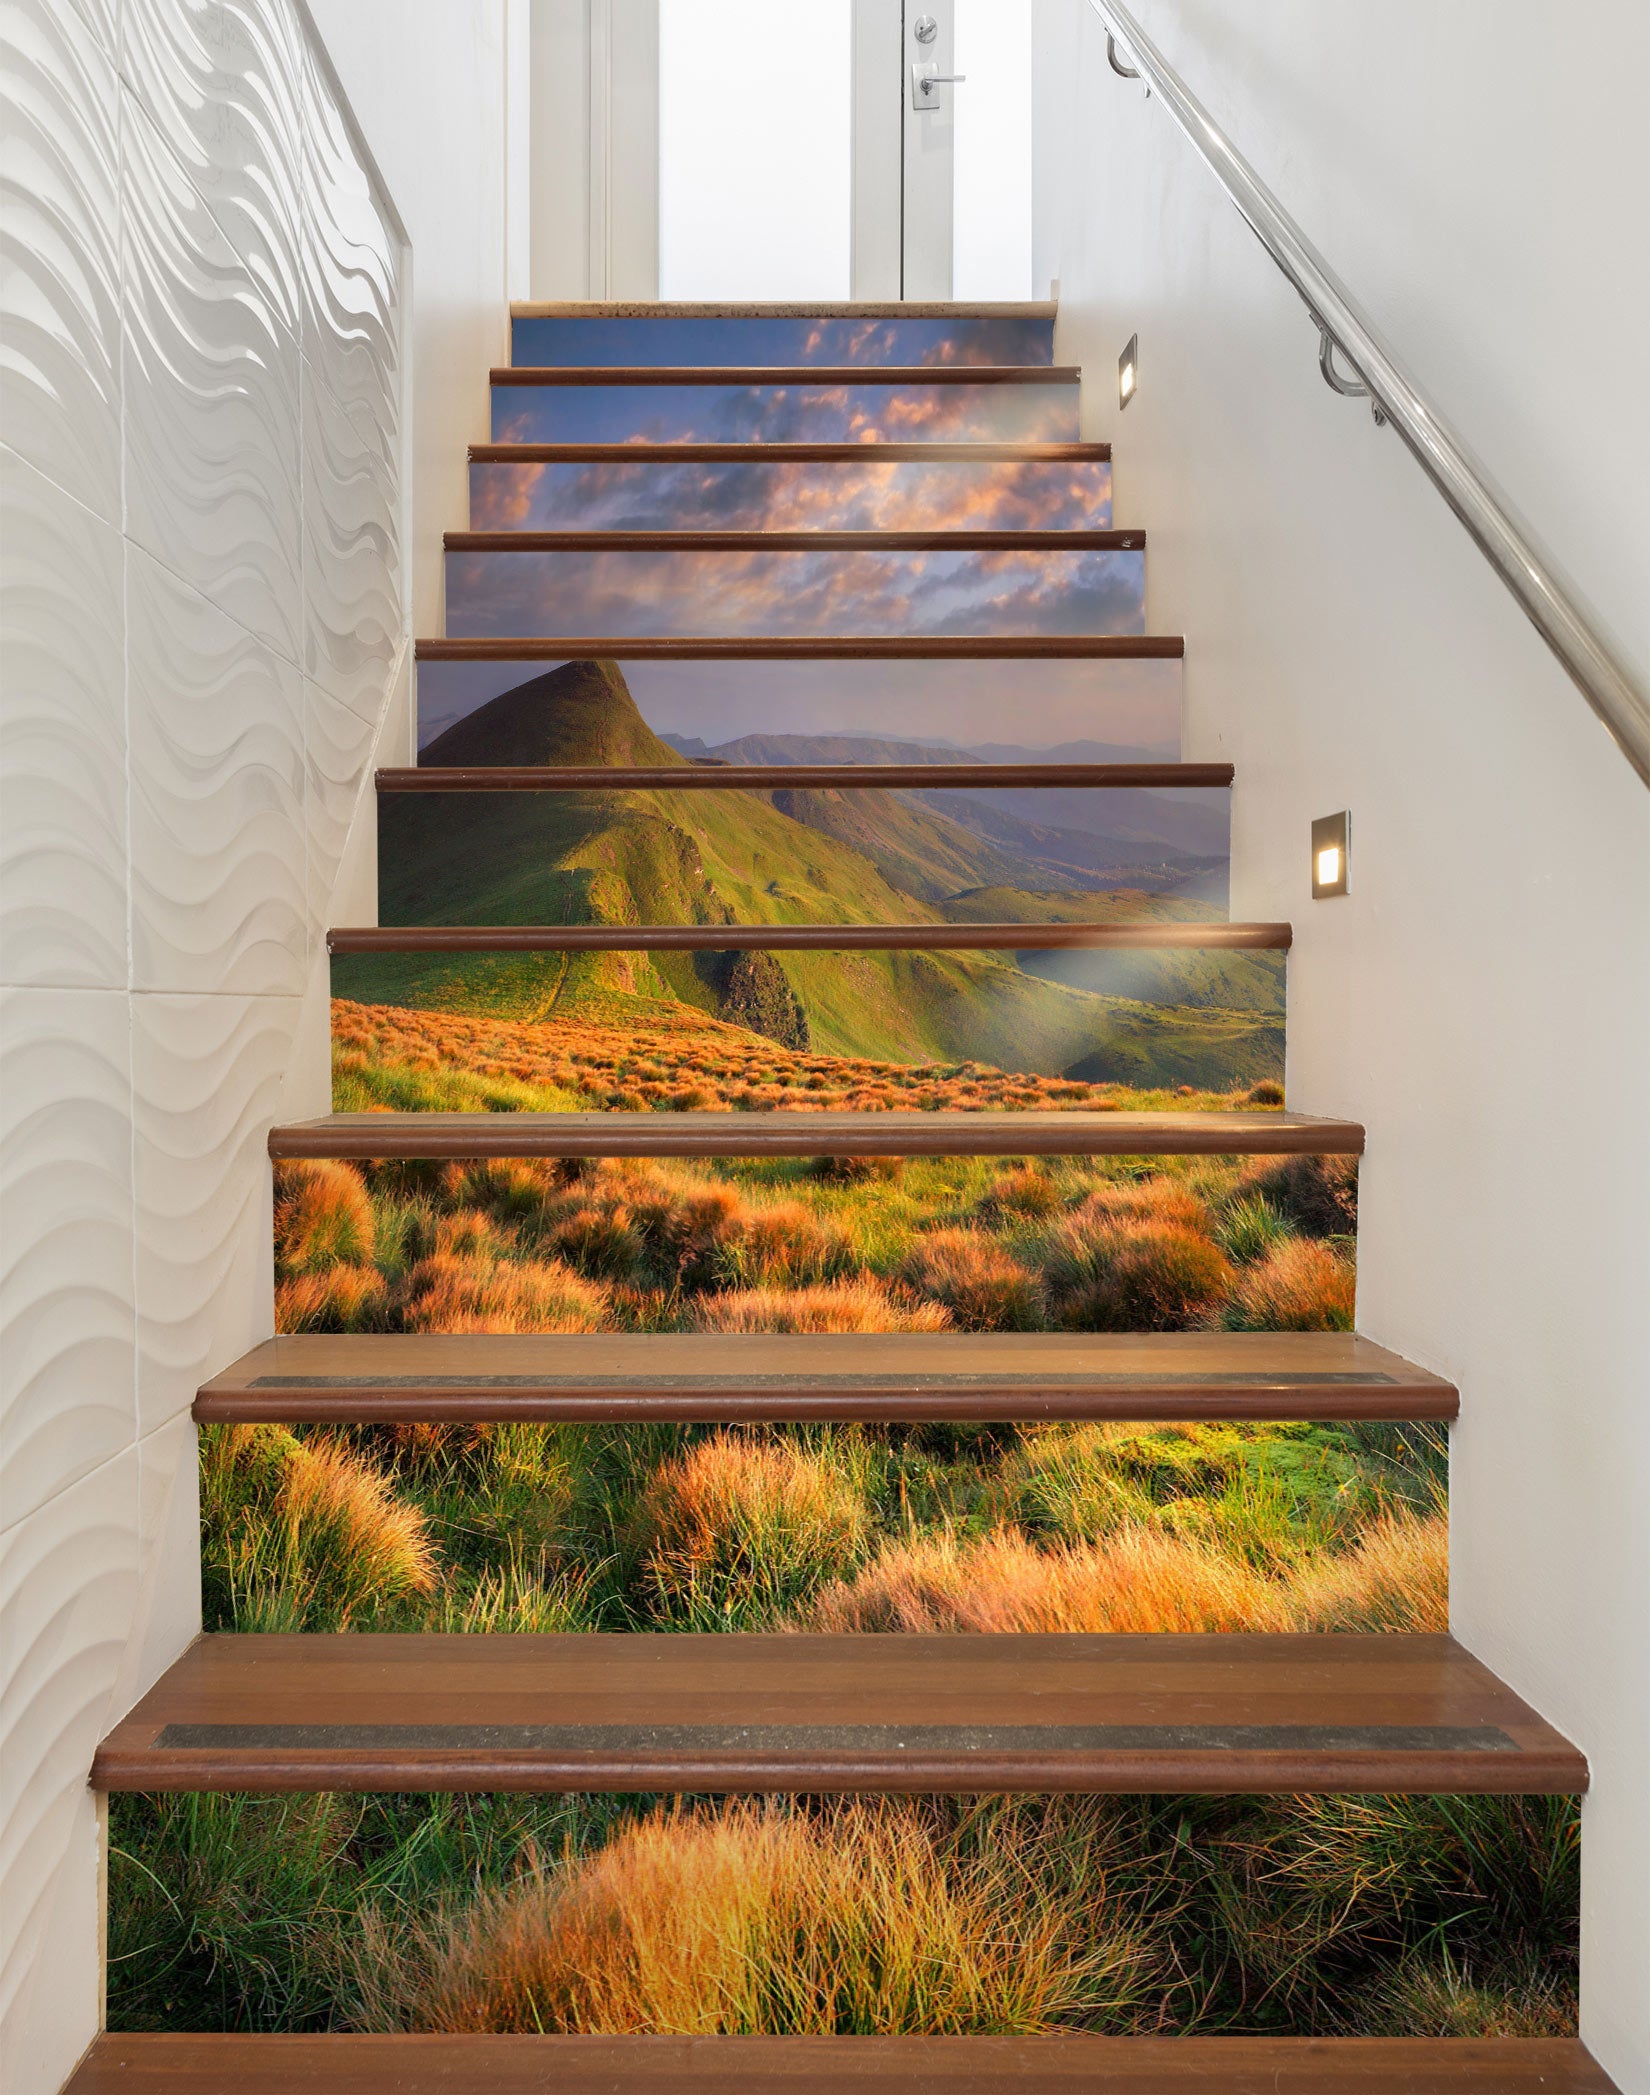 3D Mountains With Full Autumn 402 Stair Risers